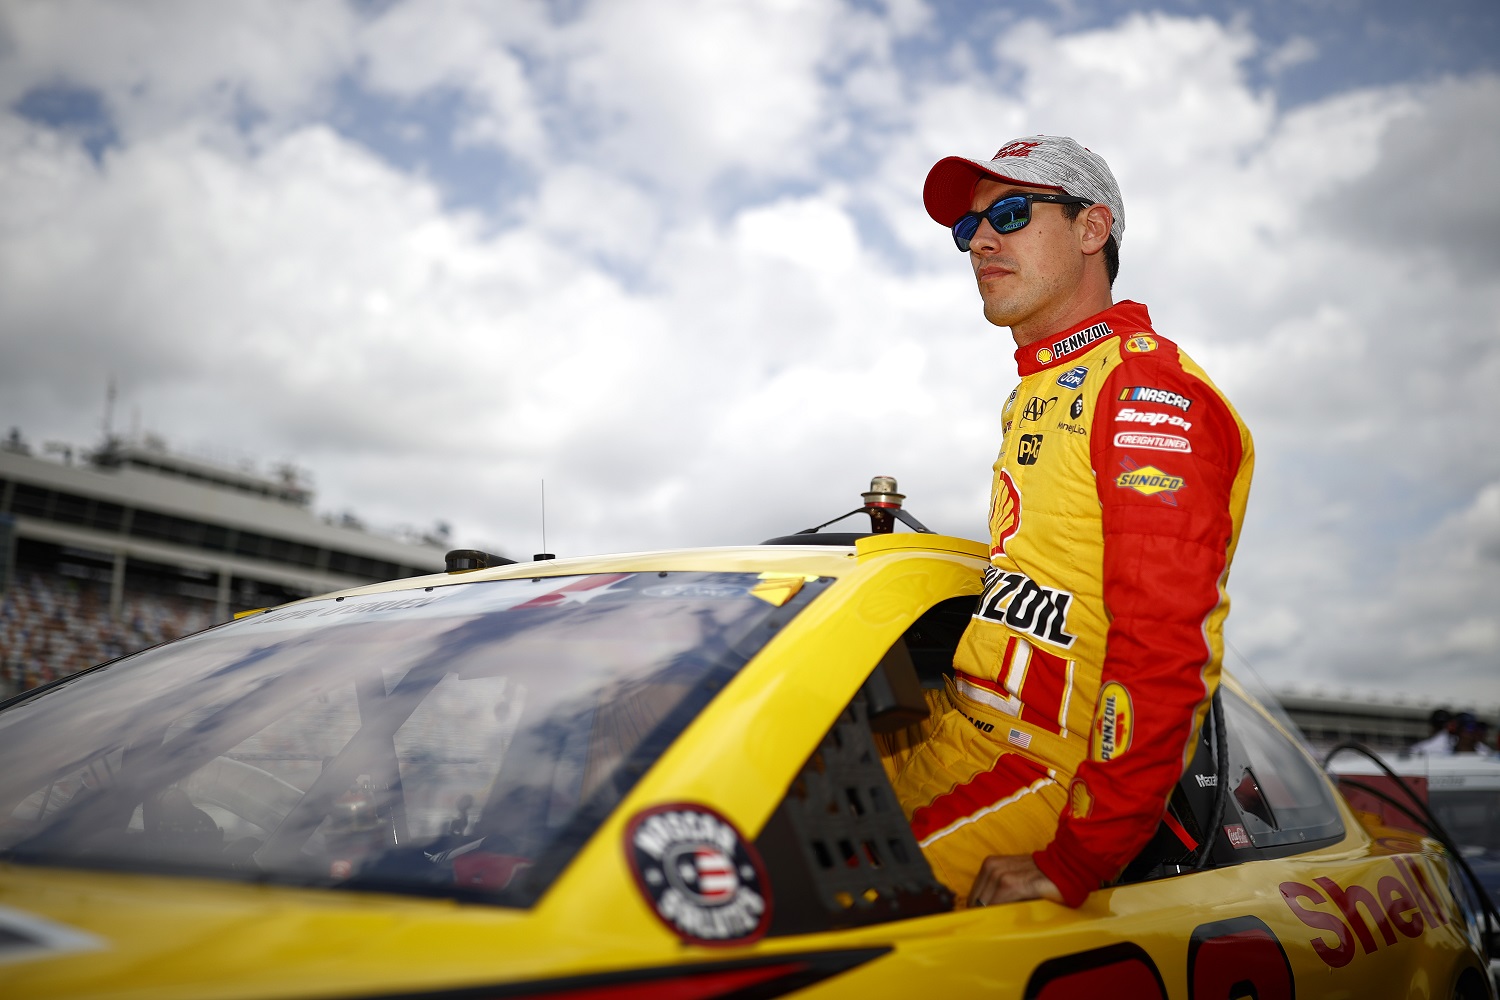 Joey Logano, driver of the No. 22 Ford, enters his car during qualifying for the NASCAR Cup Series Coca-Cola 600 at Charlotte Motor Speedway on May 29, 2021.